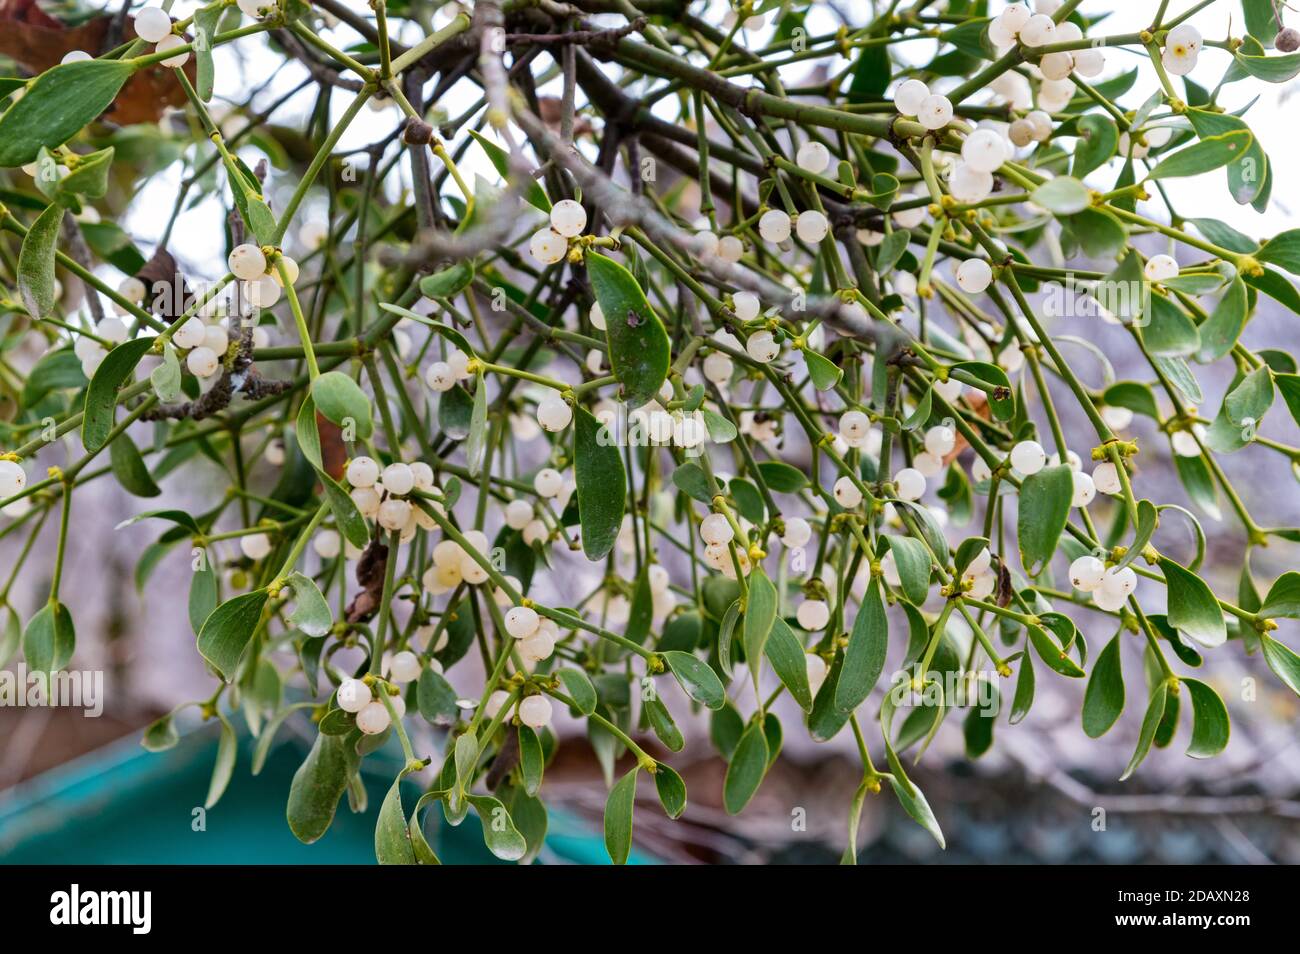 Branch of mistletoe or viscum with white fruits. Stock Photo